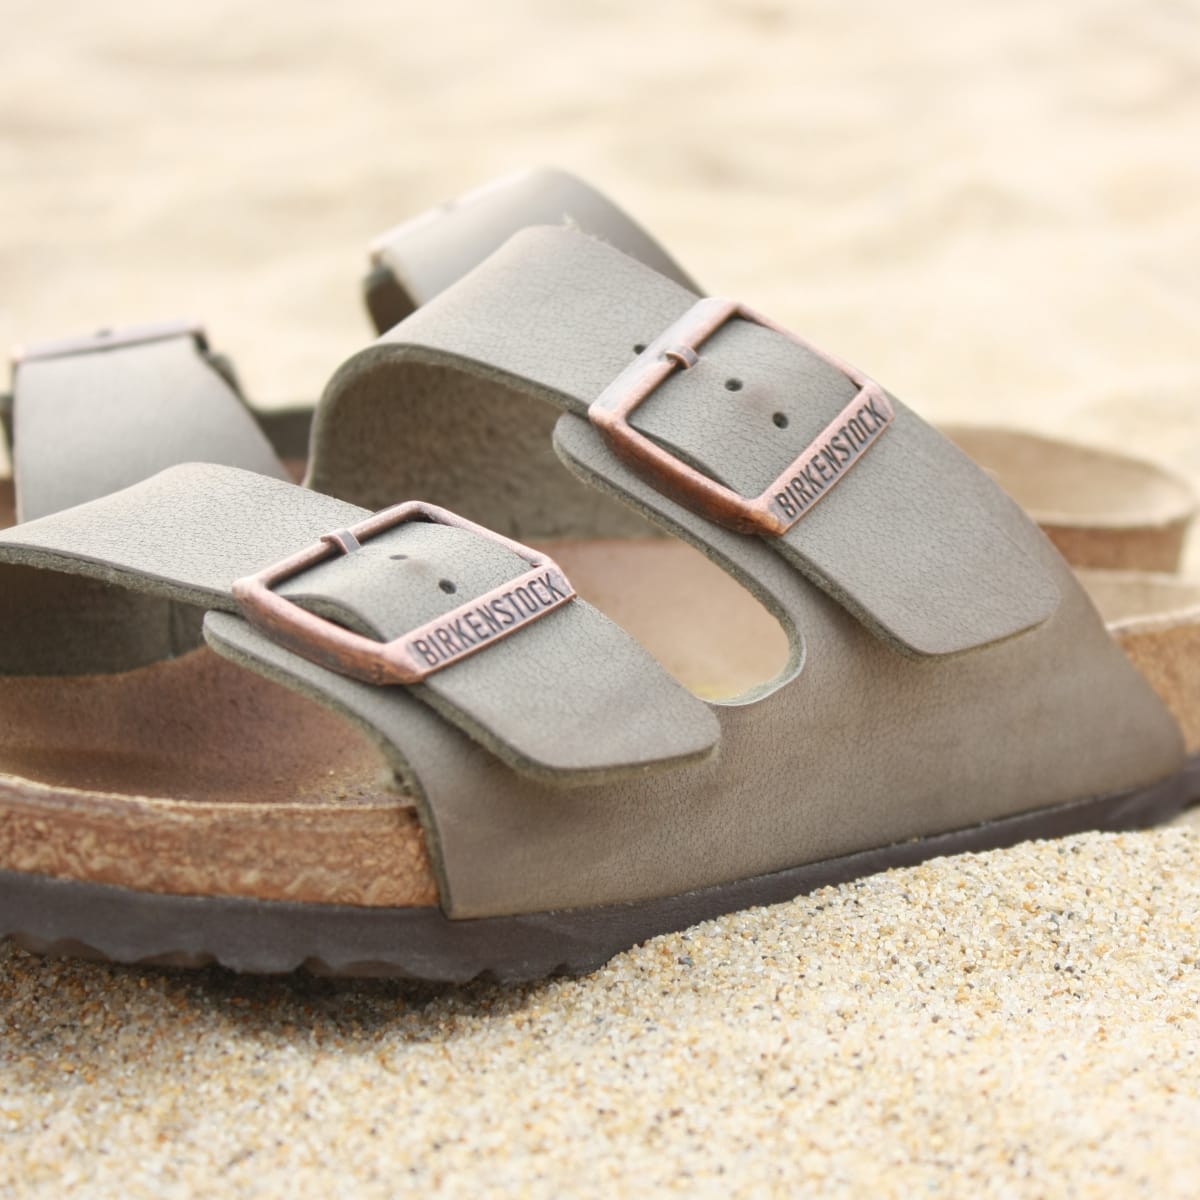 cheapest place to buy birkenstock sandals